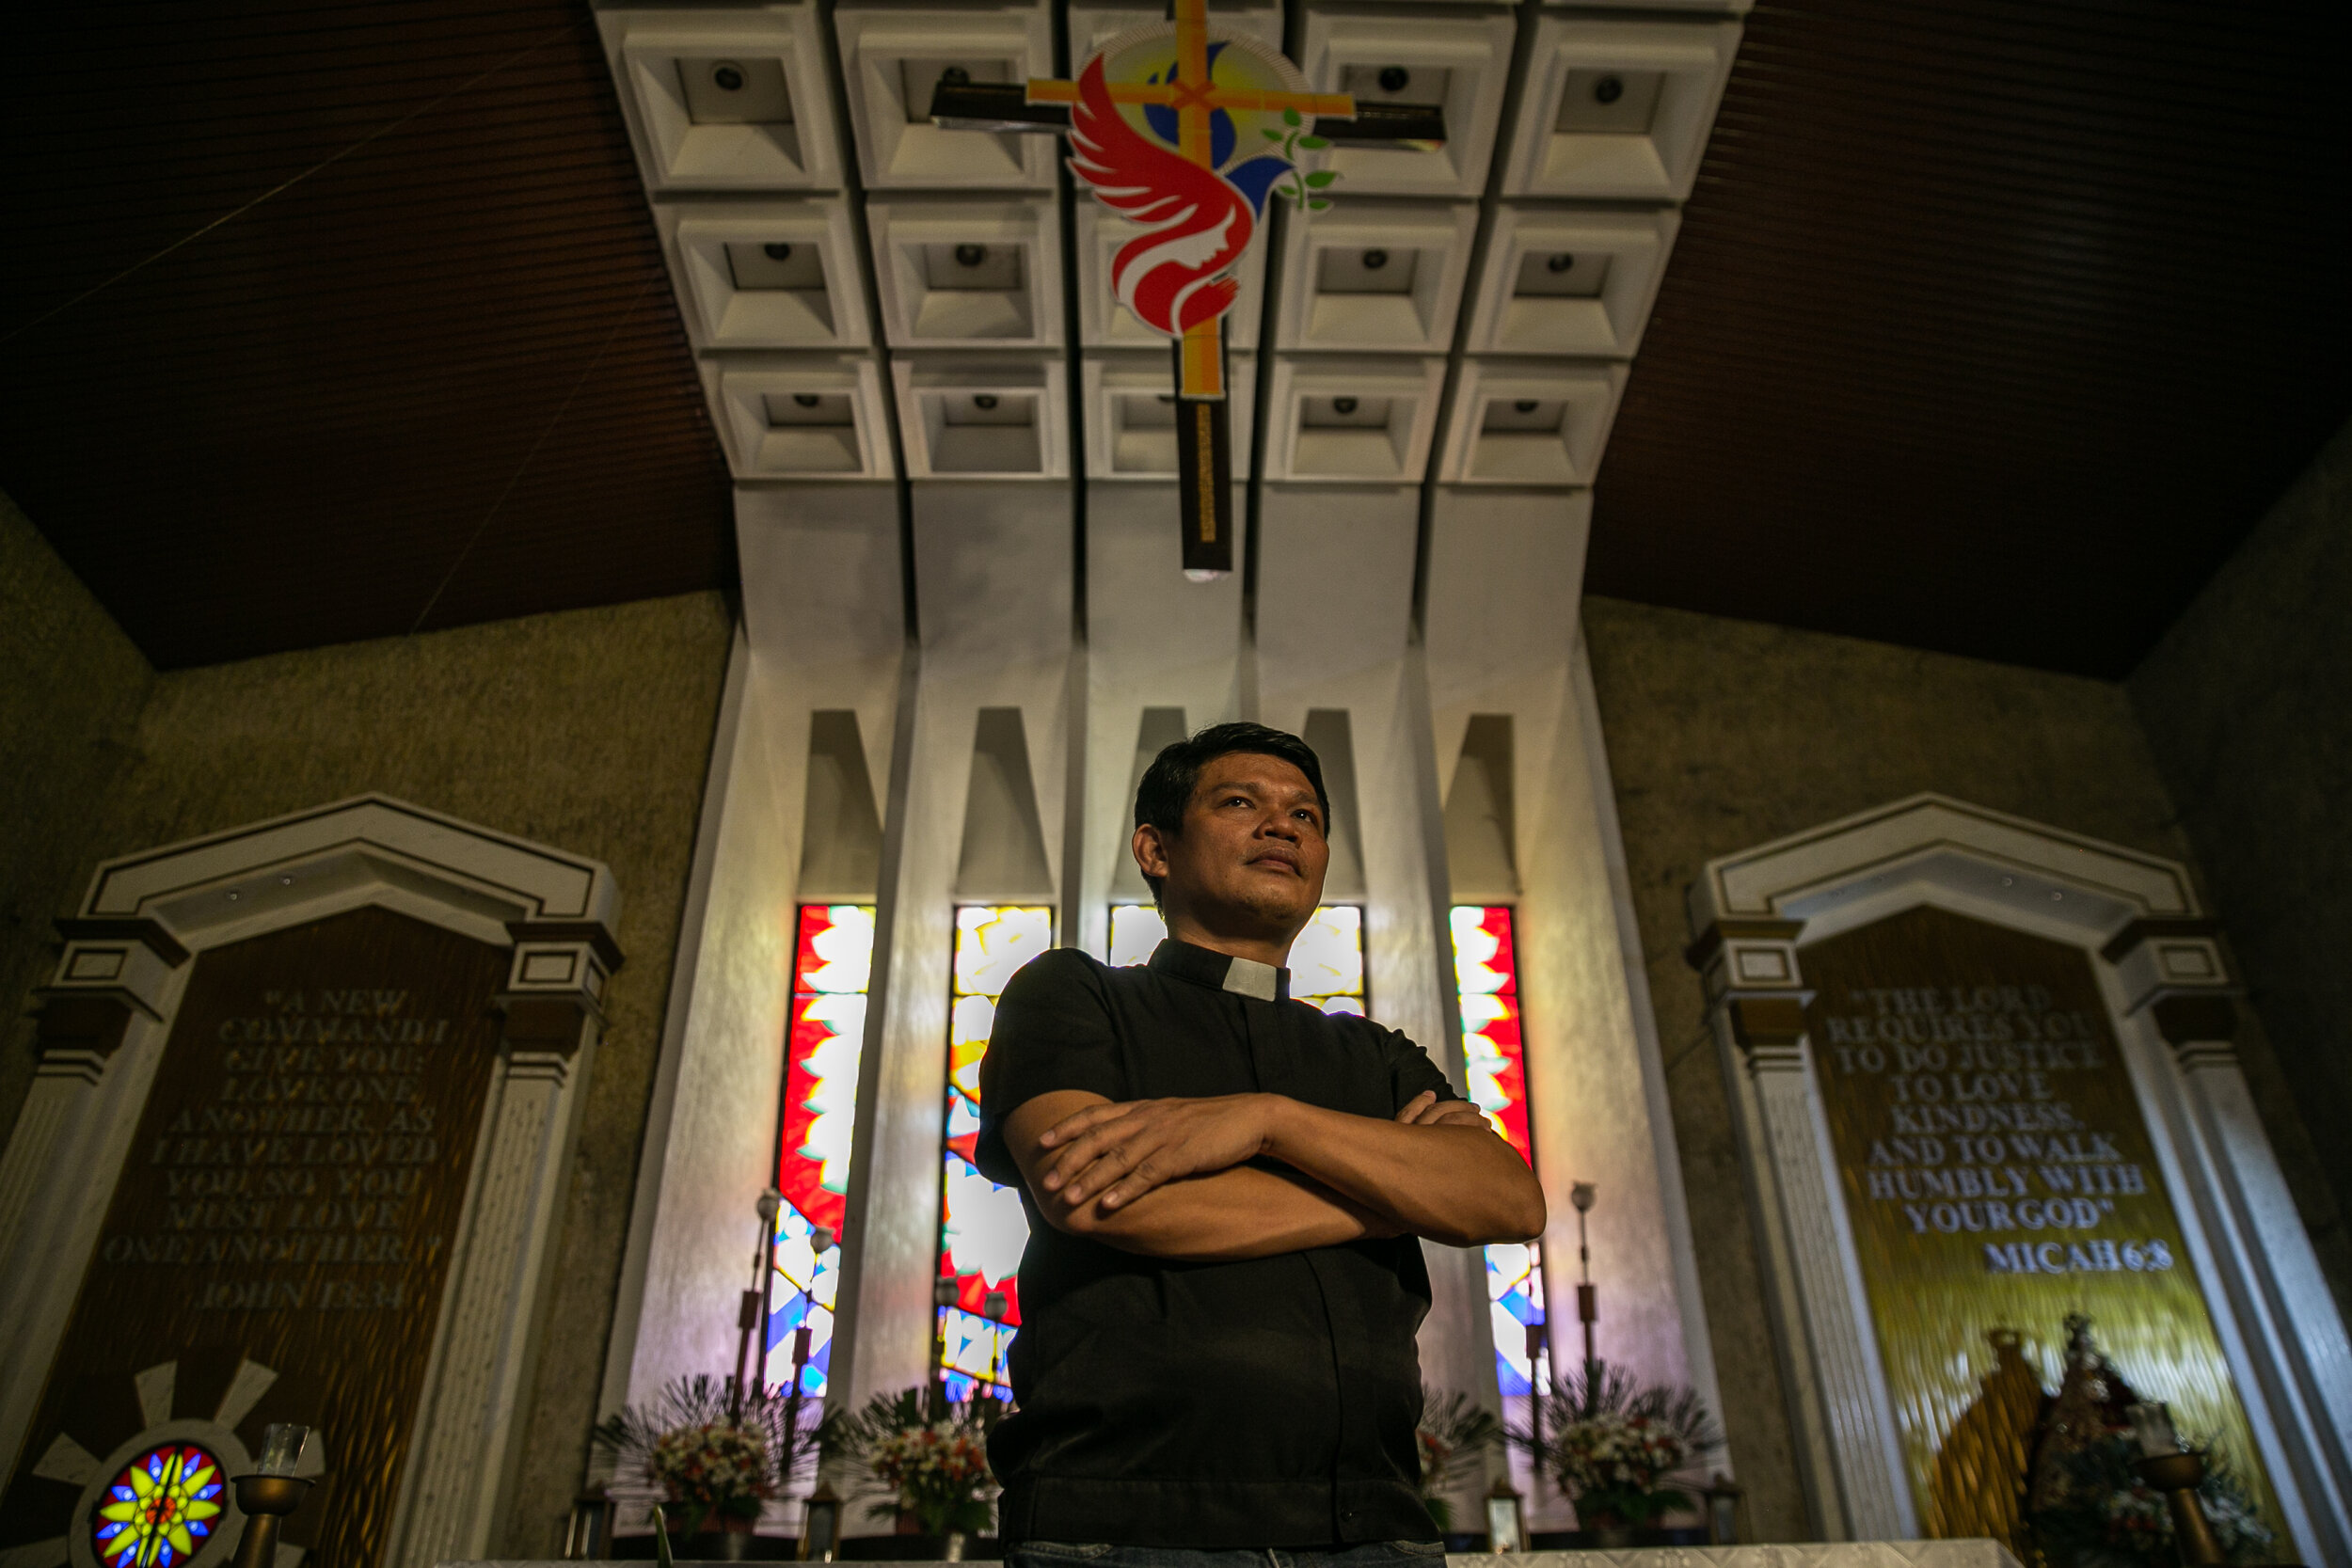  Fr. Christopher Ablon of the Iglesia Filipina Independiente (IFI) is shown inside his church’s sanctuary. In the past four years, he has been subjected to vilification and ‘red-tagging.’ He was transferred to the IFI National Cathedral from Mindanao